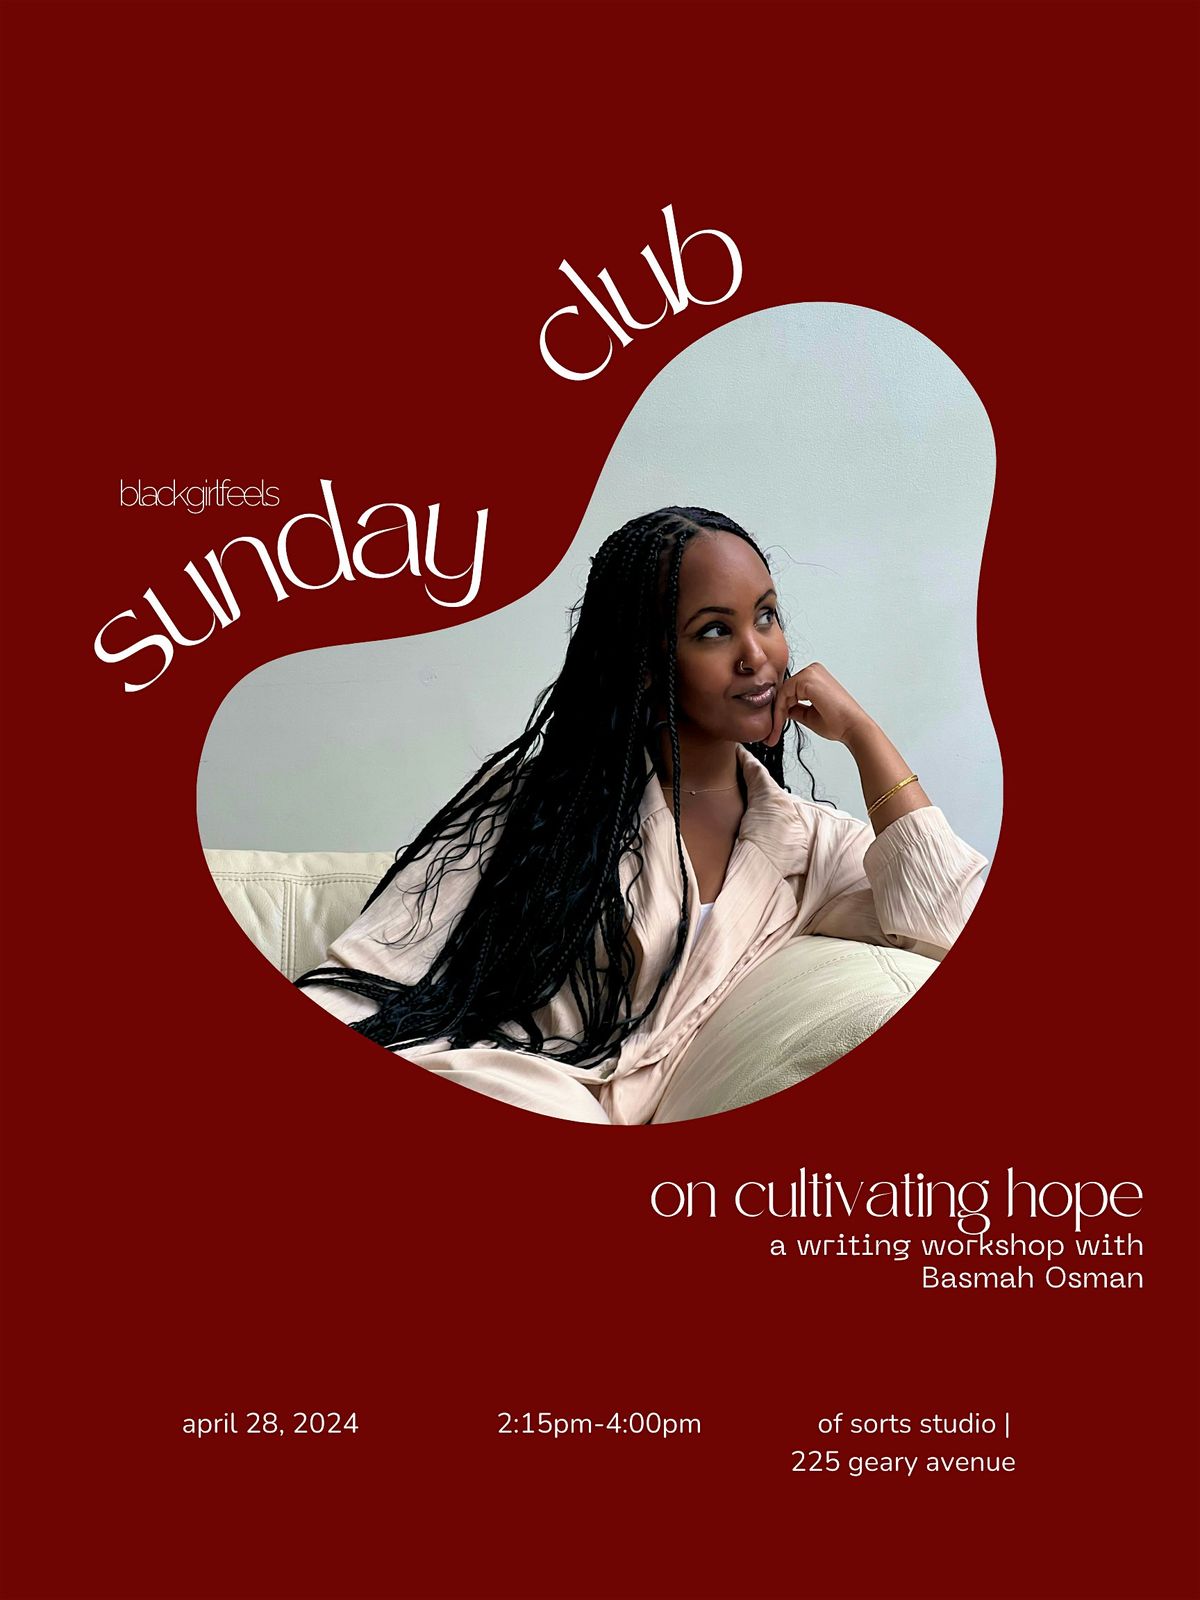 Sunday Club #4: On Cultivating Hope - A Writing Workshop